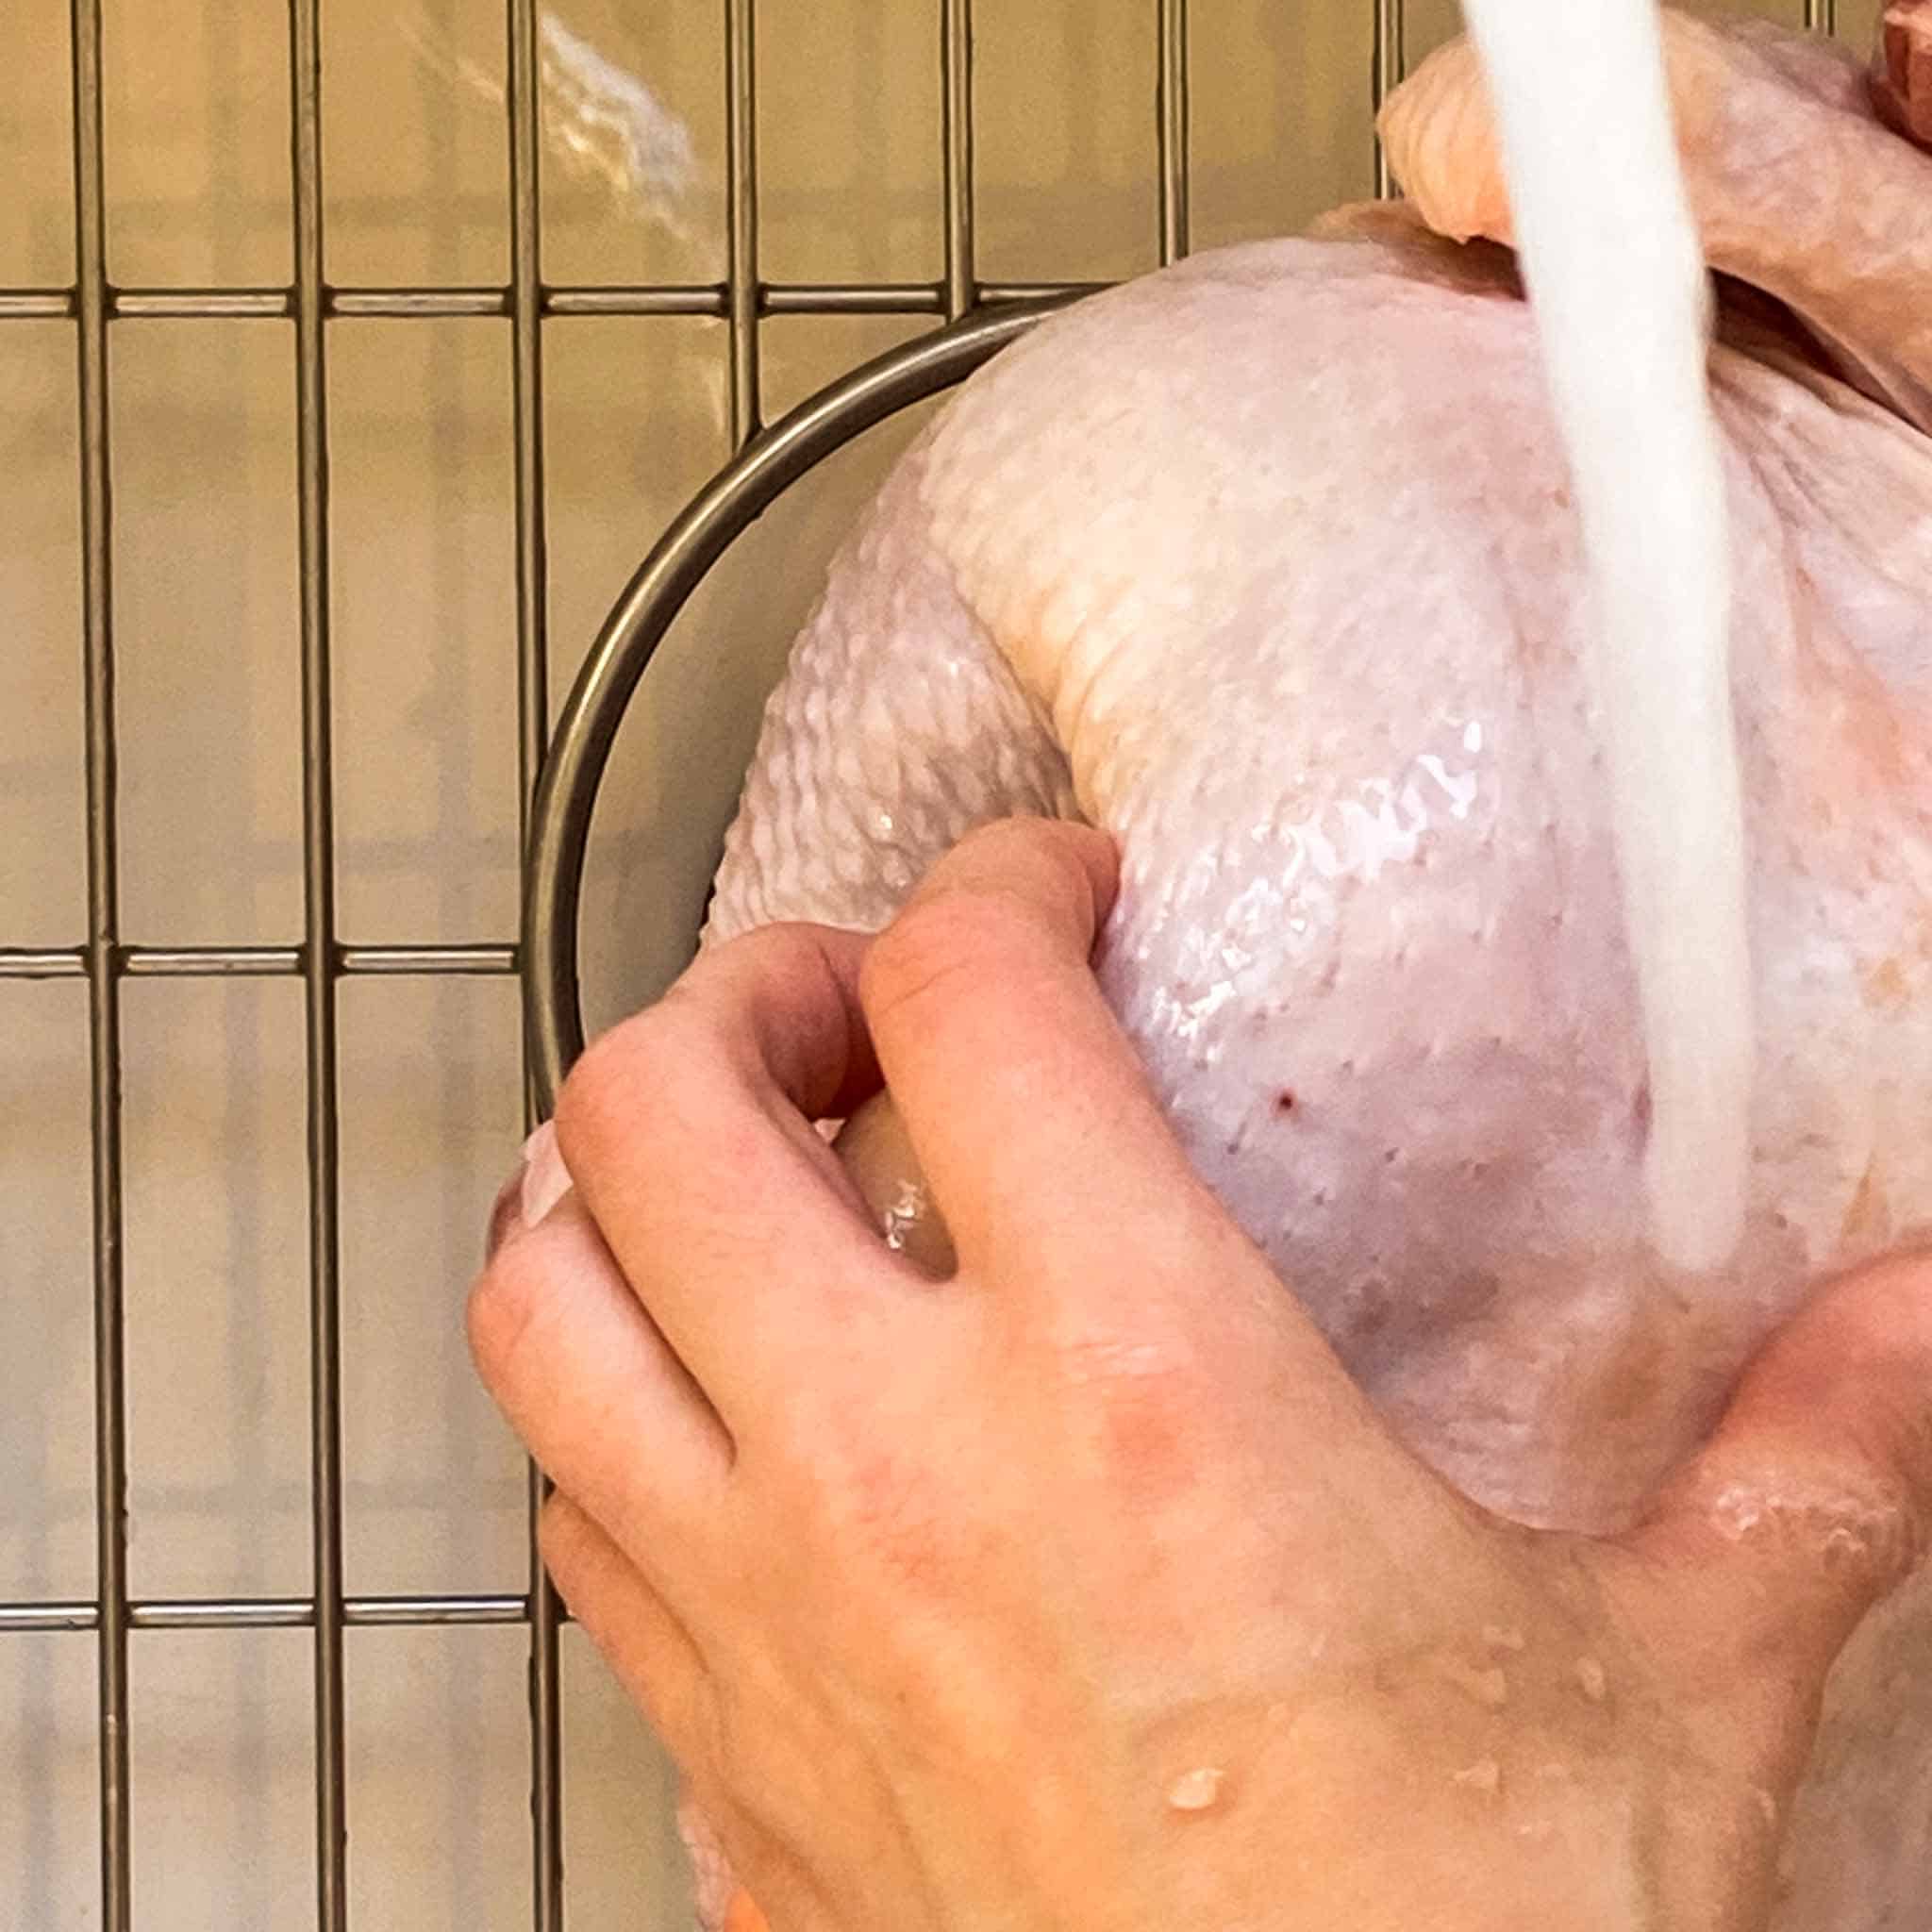 Raw chicken being washed in the sink.